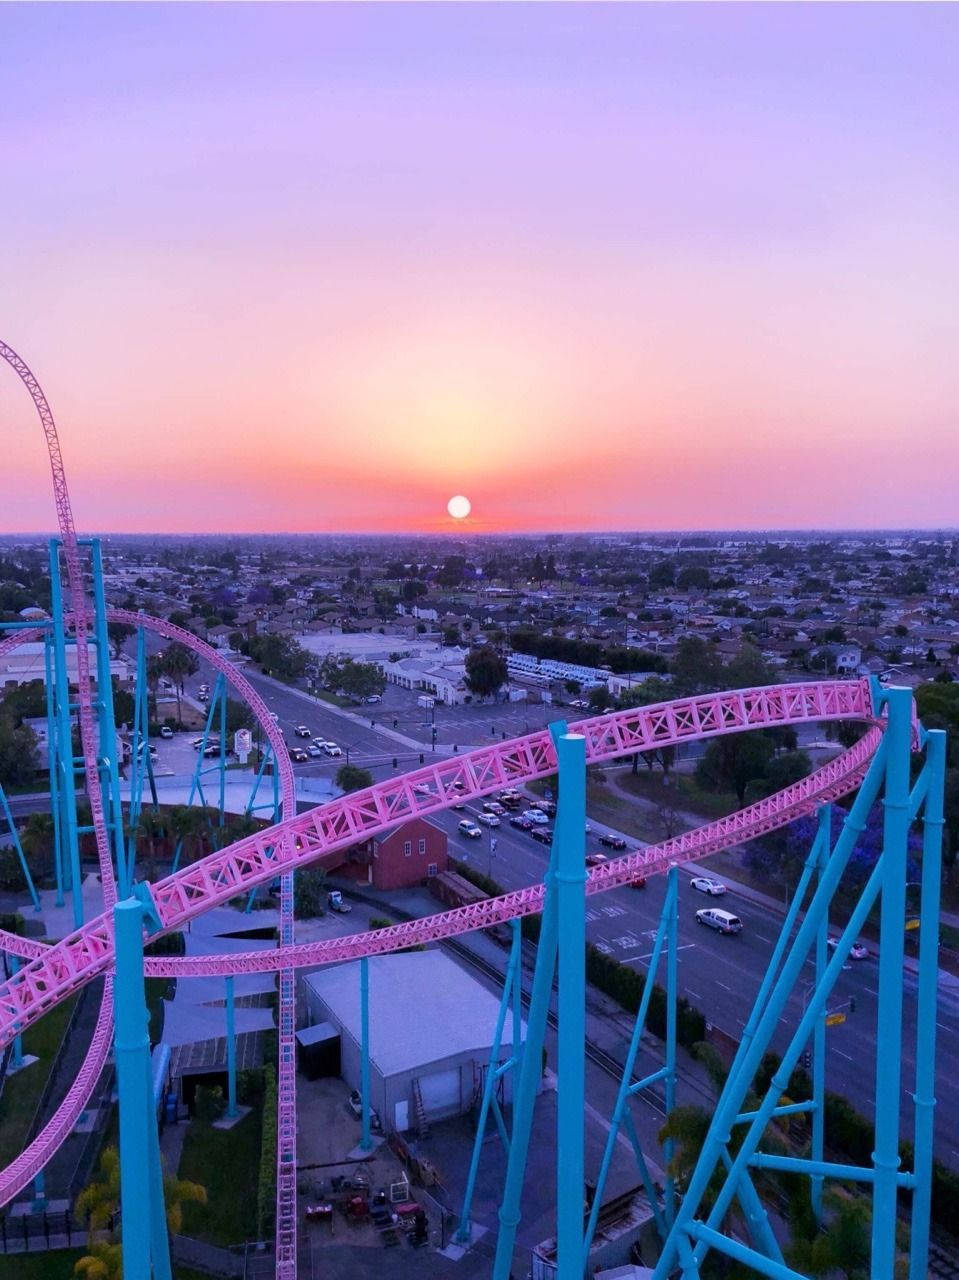 Roller Coaster By The Sunset